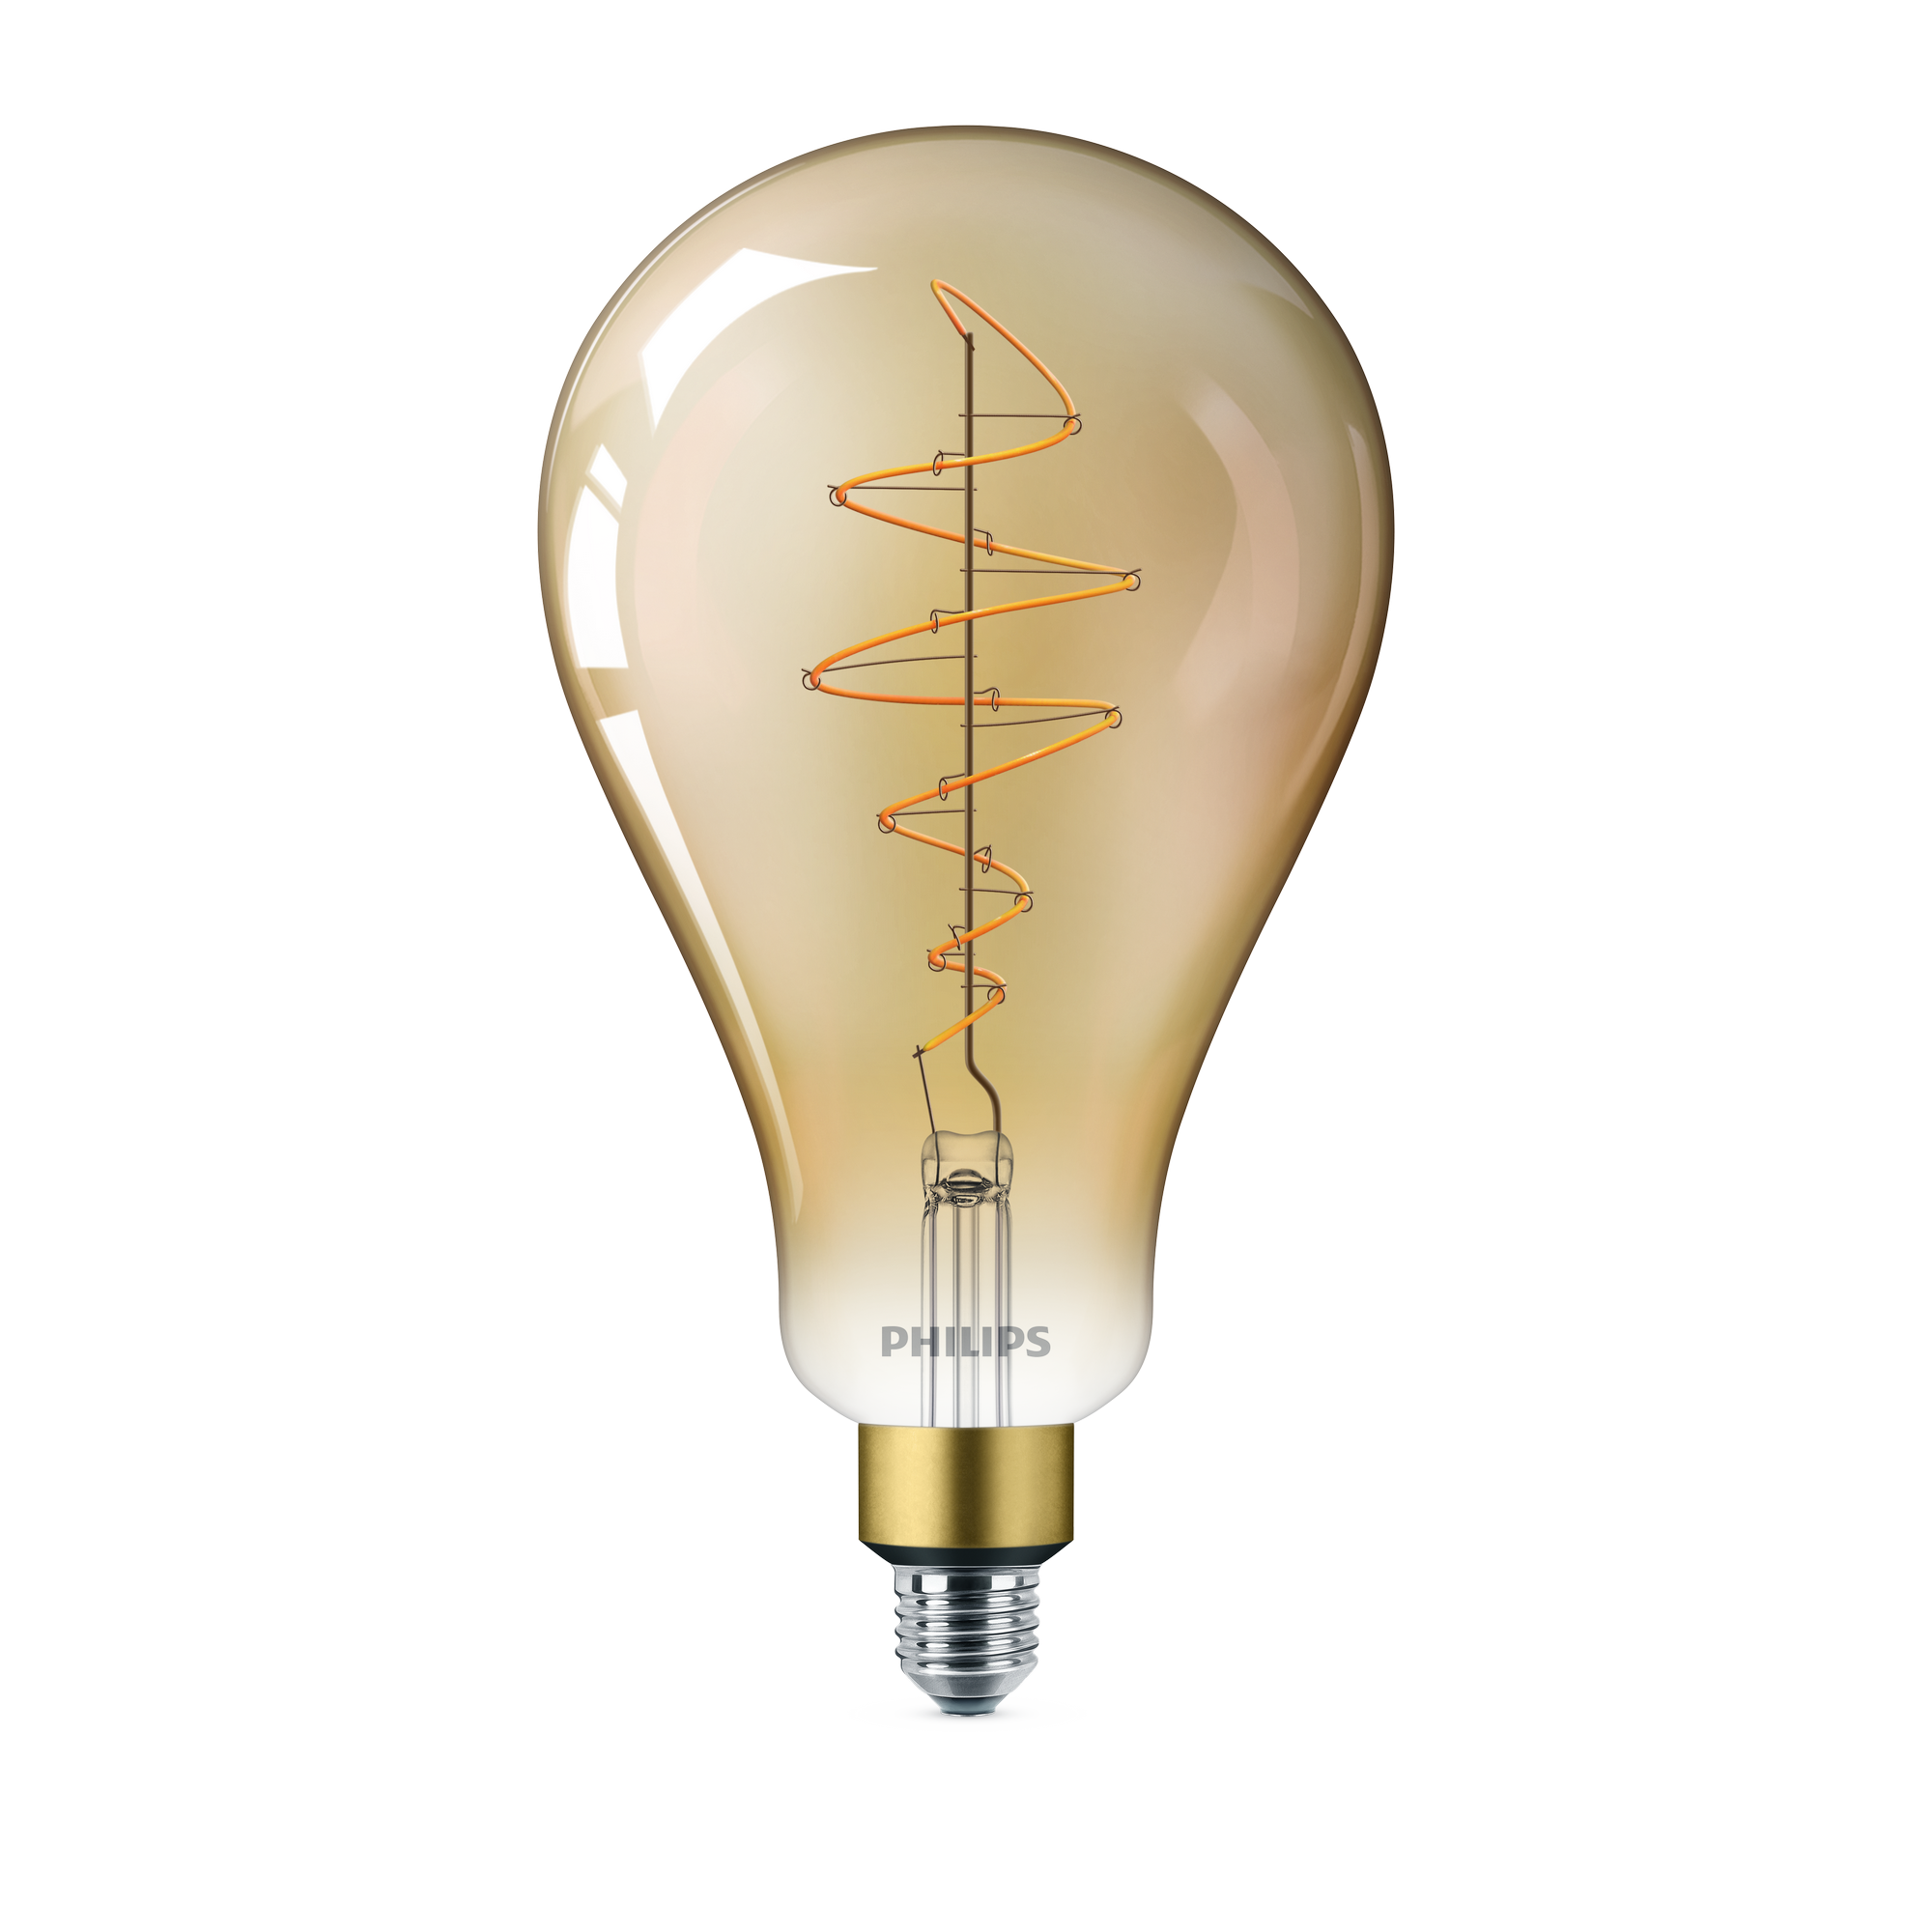 LED-Standardlampe 'Vintage' XL Gold E27 6,5 W, dimmbar + product picture